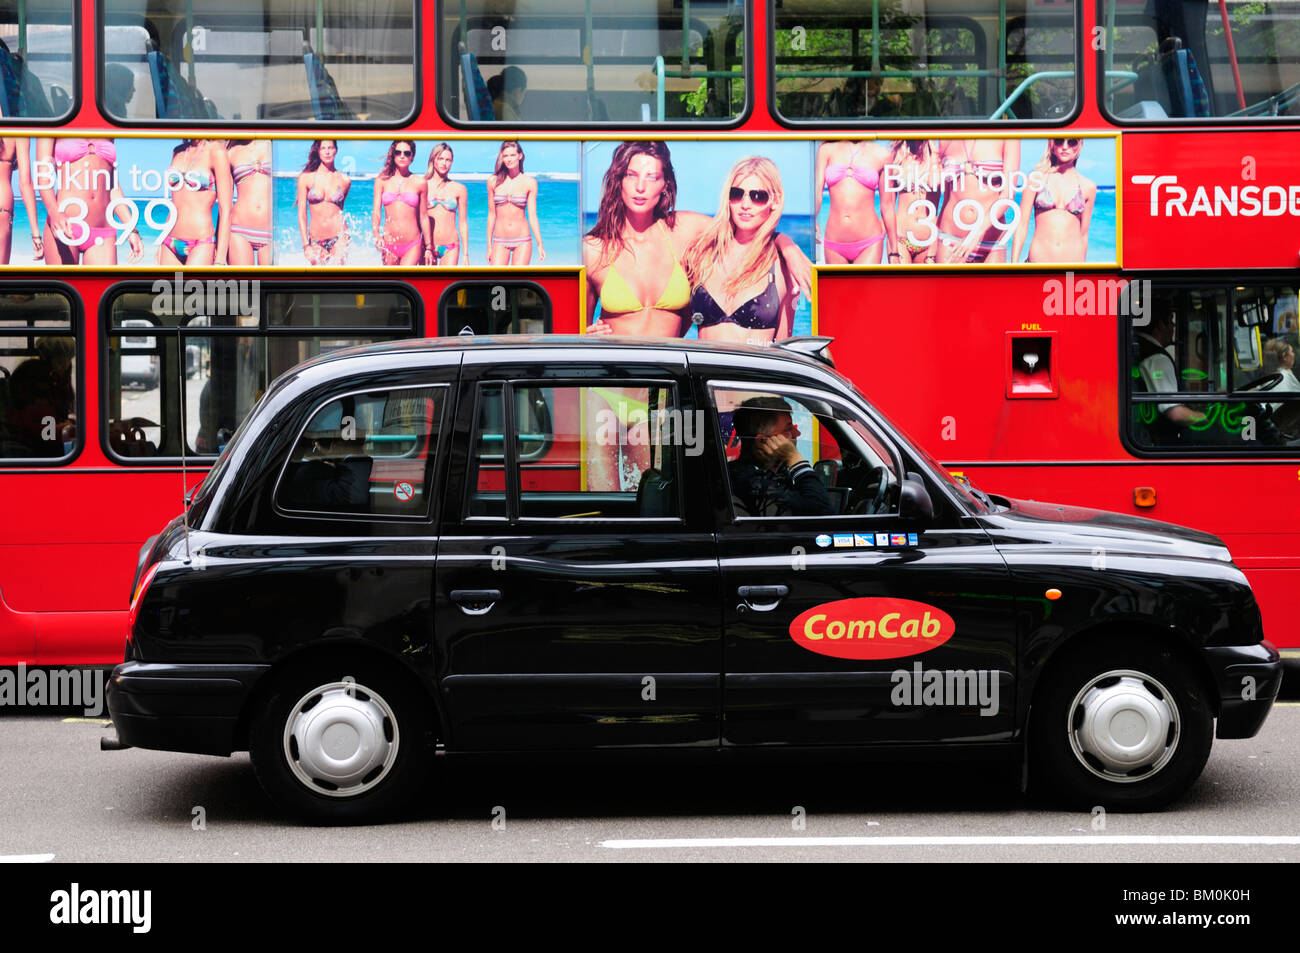 ComCab London Taxi and  Red Bus with  H&M Bikini advertisement, Oxford Street, London, England, UK Stock Photo